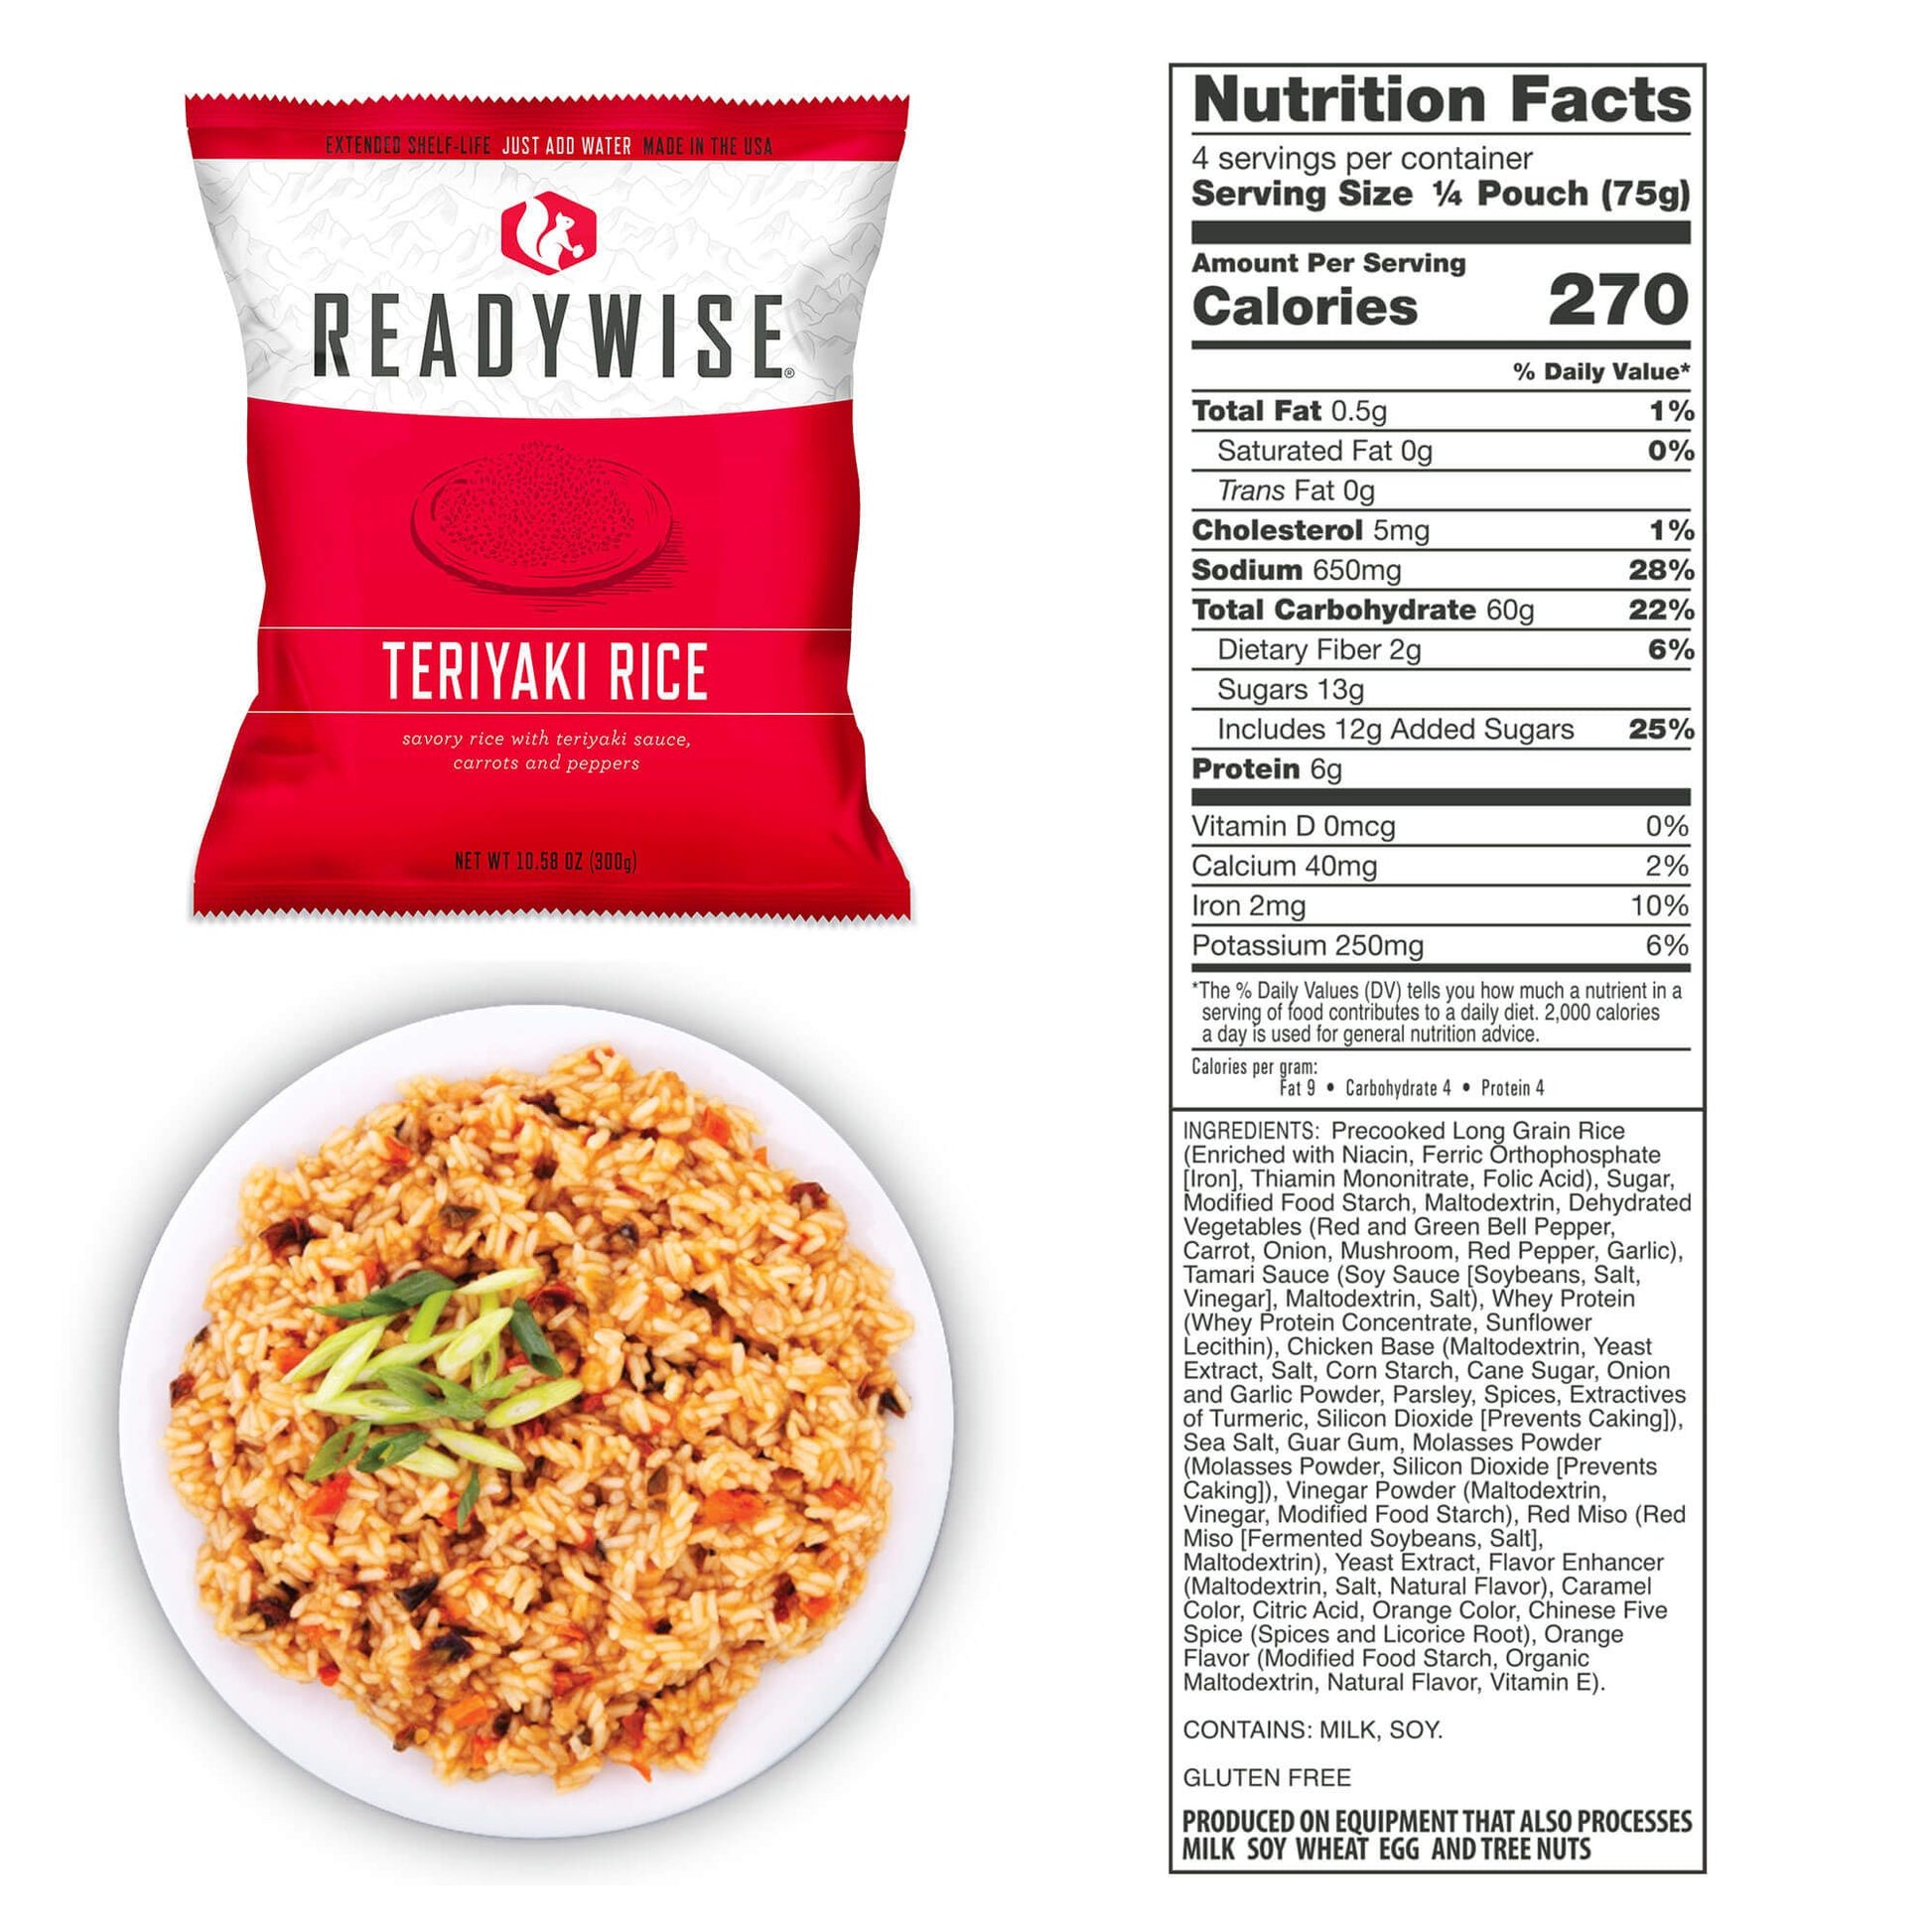 Teriyaki Rice packet displayed in a bowl with nutritional information